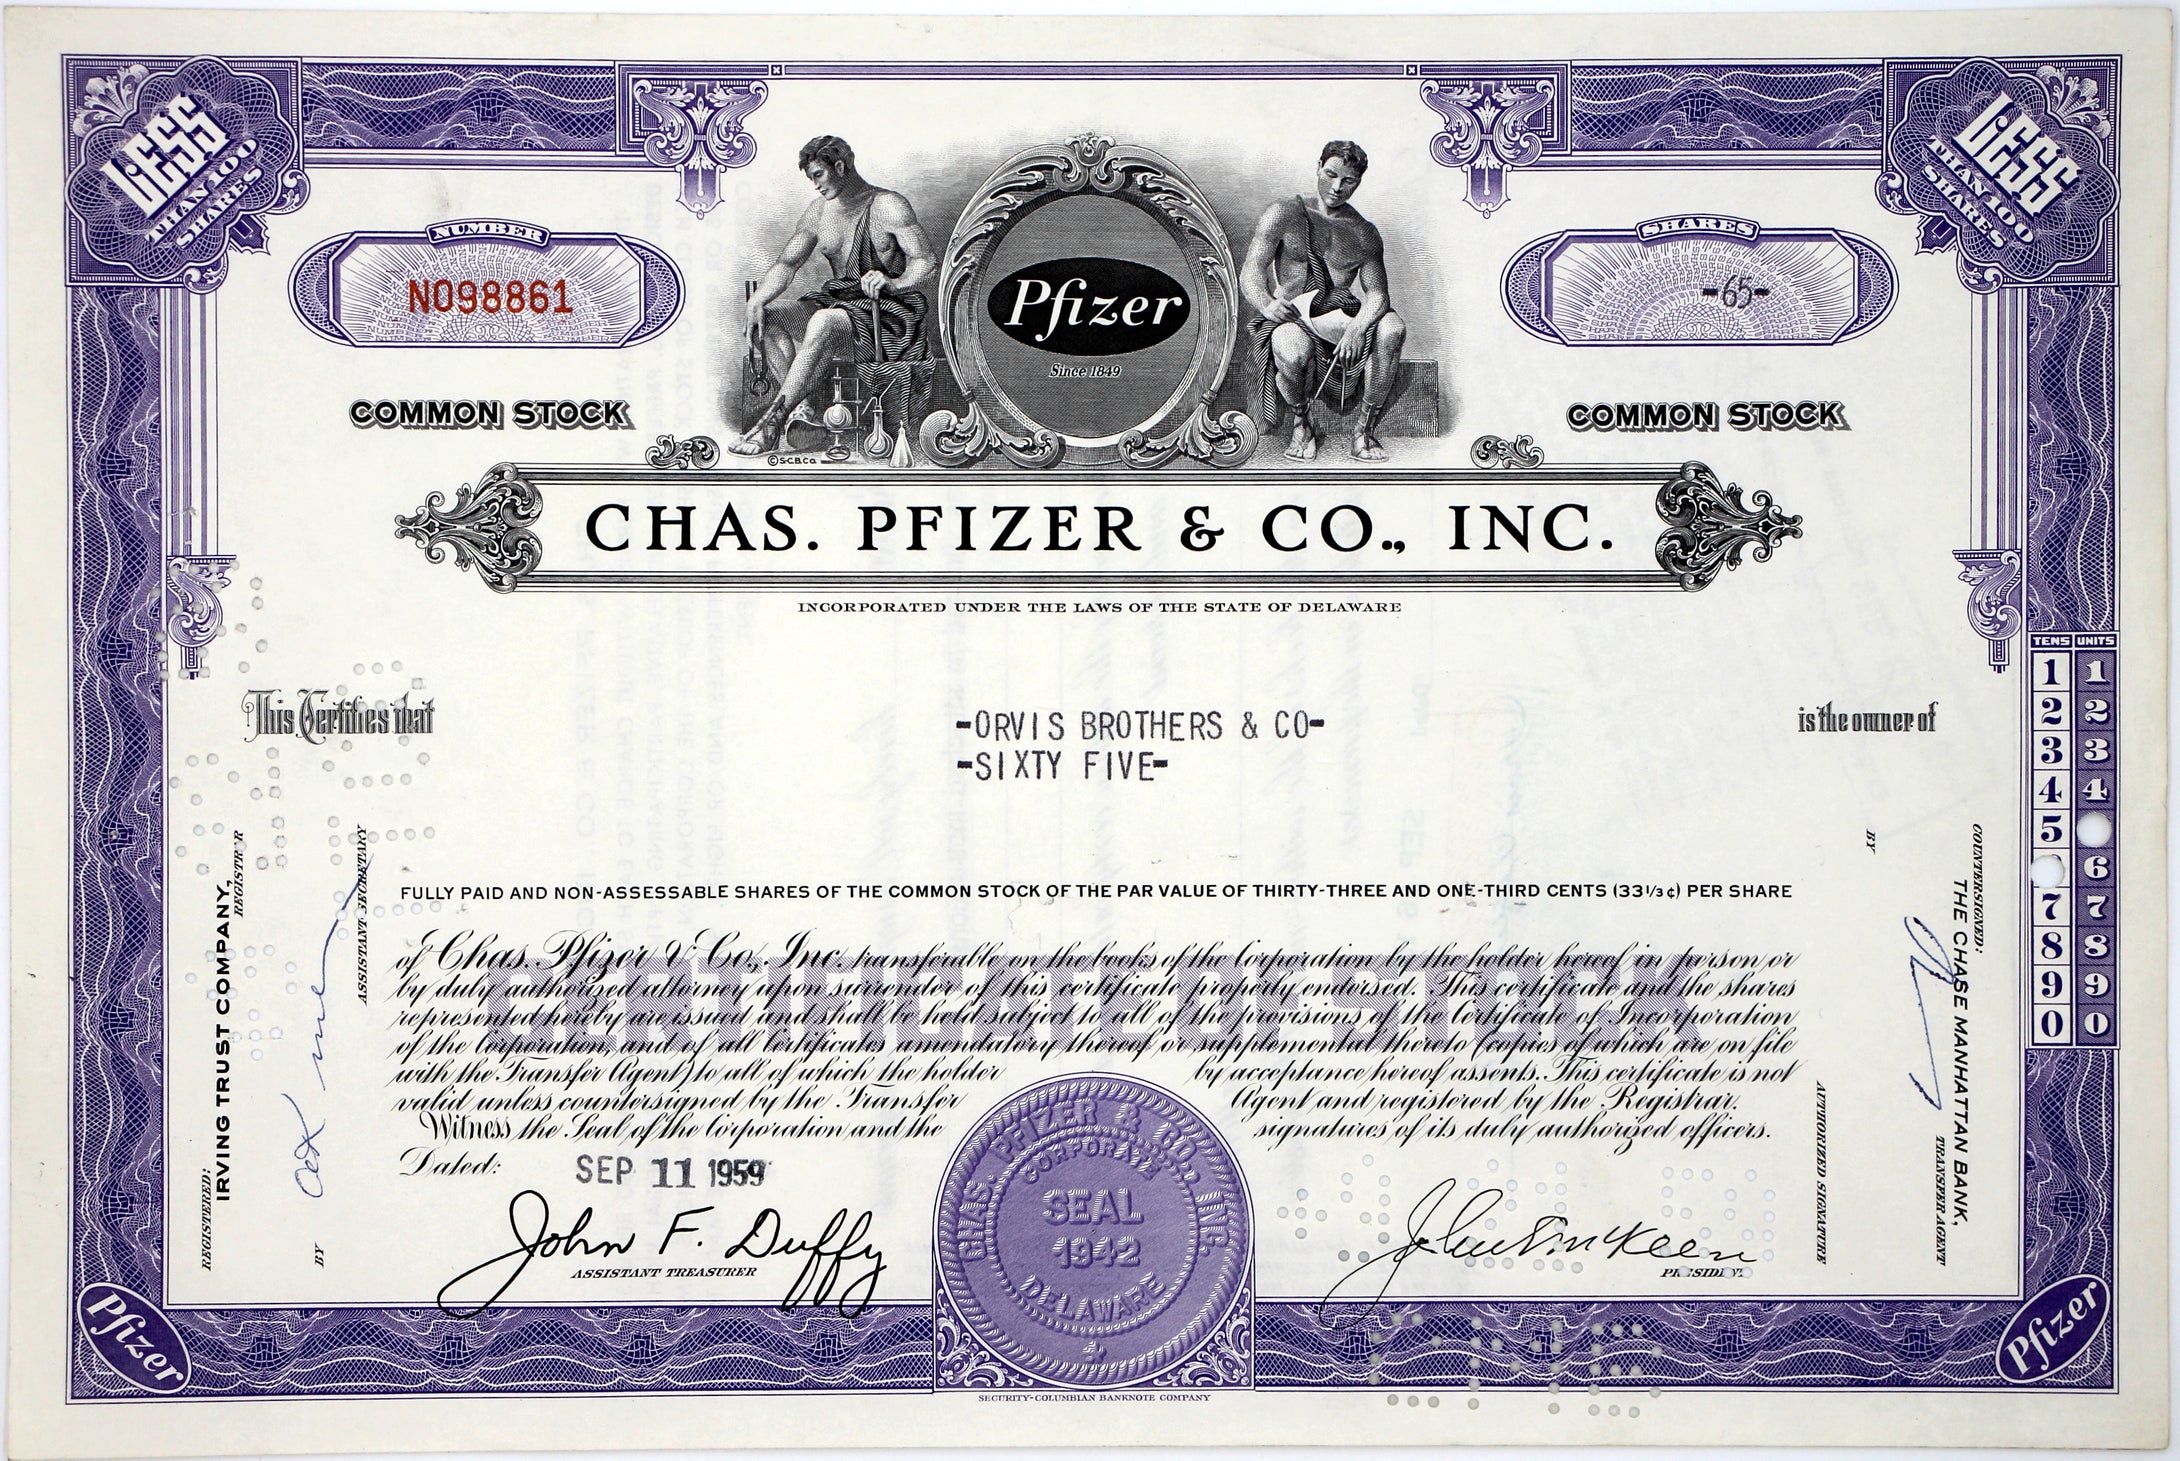 Chas. Pfizer & Co., Inc. Stock Certificate - 1950s-60s - Wall Street Treasures